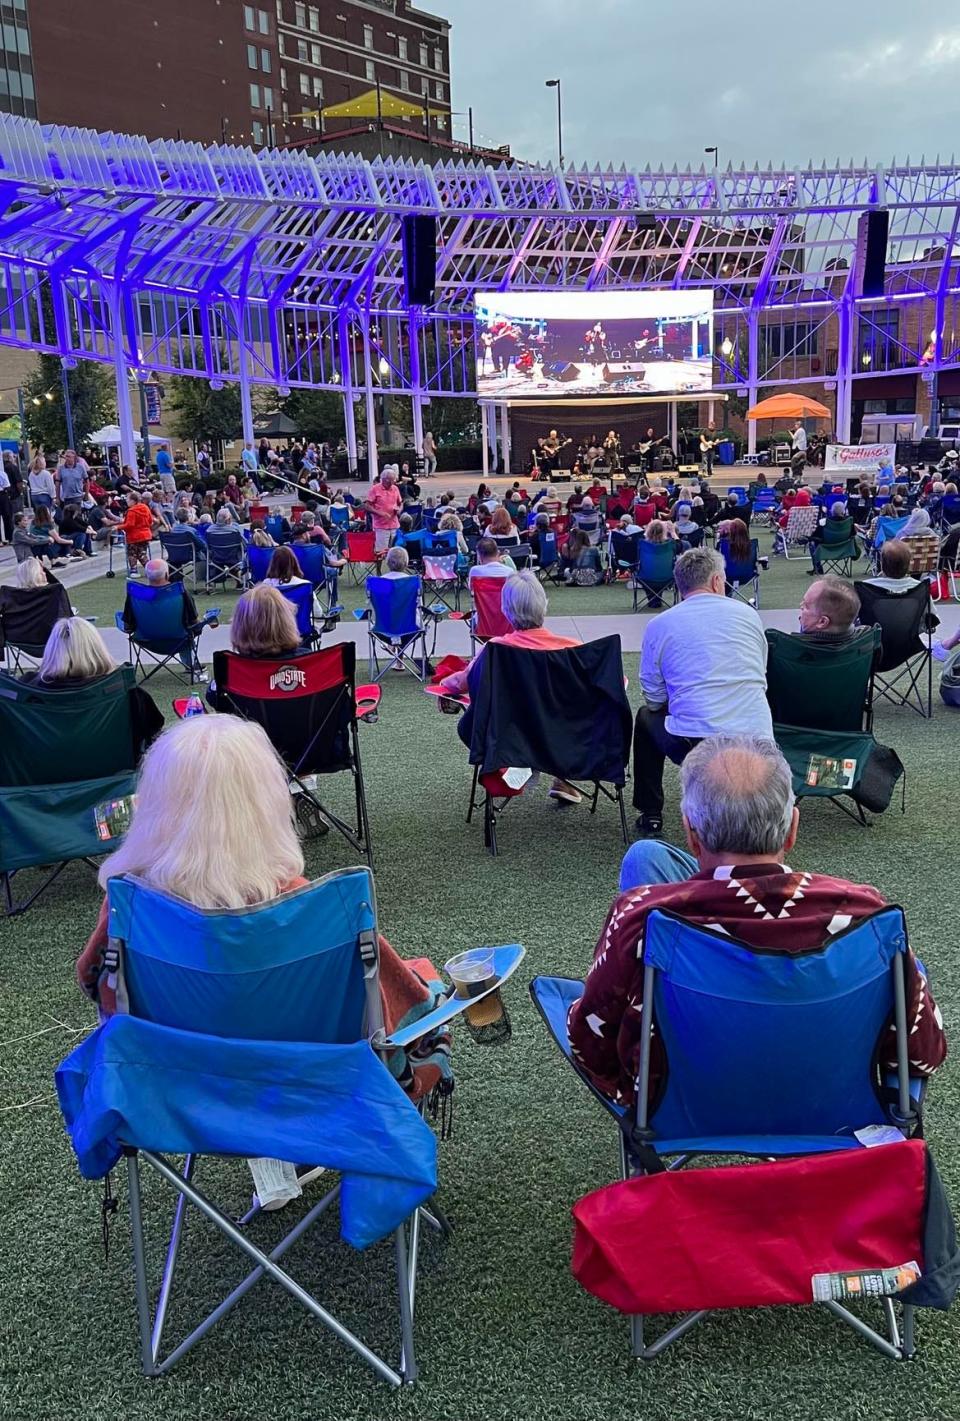 Attendance was high on Friday during the second and final day of the new Downtown Canton Music Fest at Centennial Plaza.